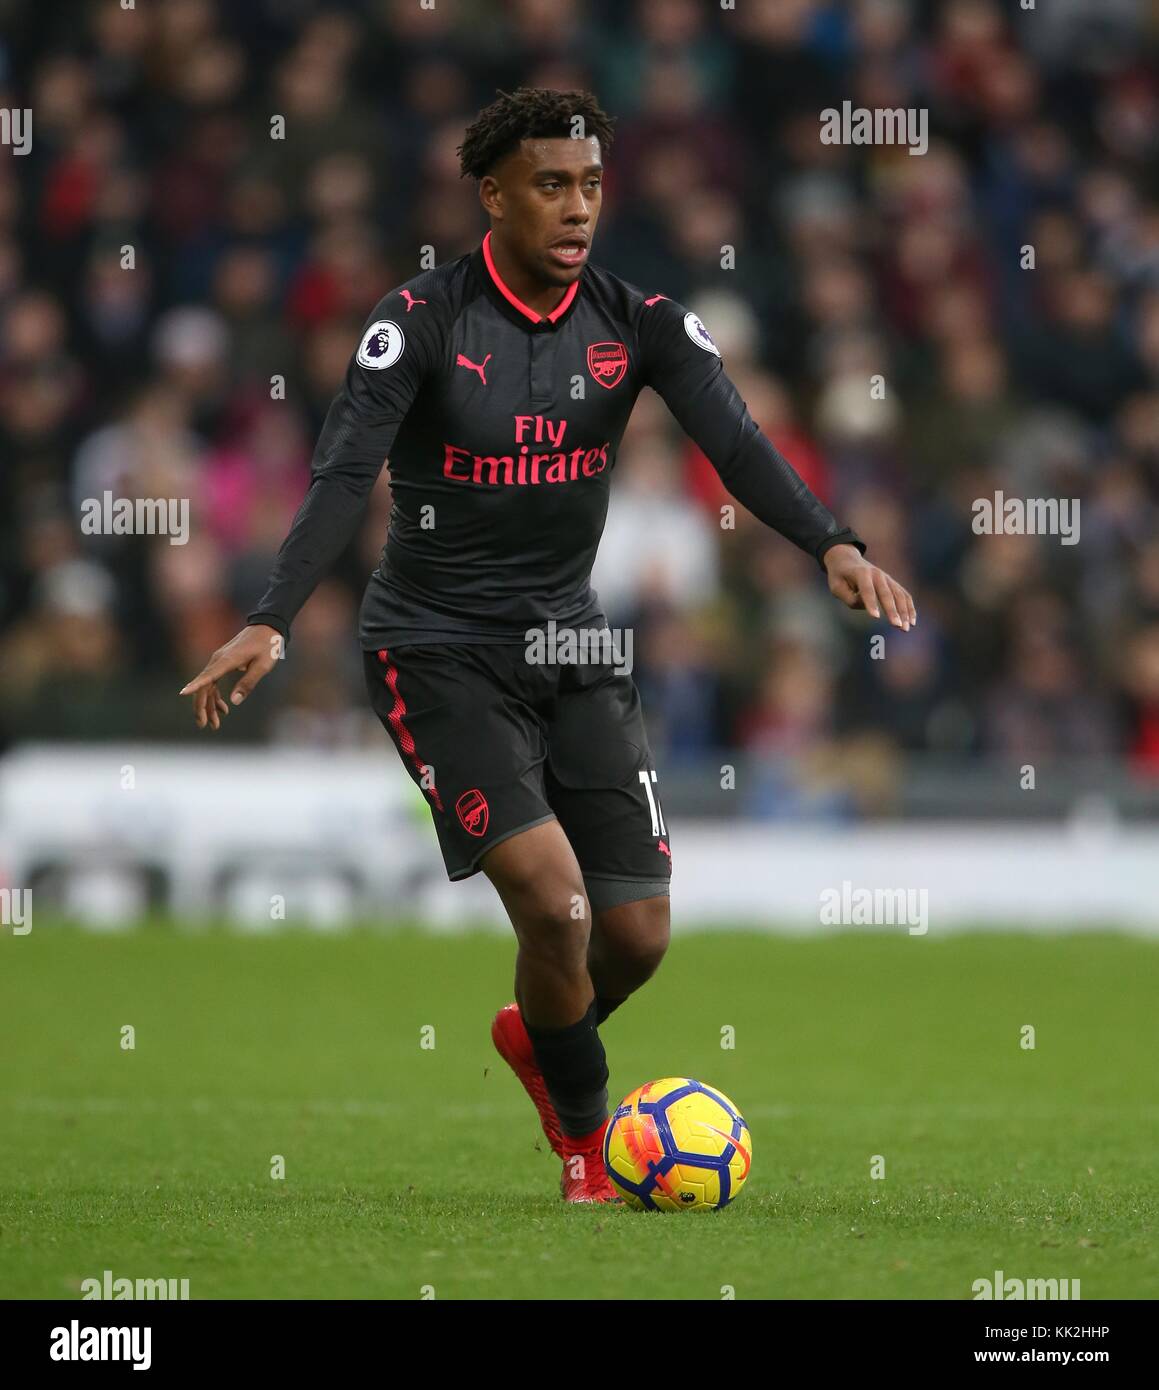 ALEX IWOBI ARSENAL FC BURNLEY V ARSENAL PREMIER LEAGUE TURF MOOR, BURNLEY, ENGLAND 26 November 2017 GBB5792 STRICTLY EDITORIAL USE ONLY. If The Player/Players Depicted In This Image Is/Are Playing For An English Club Or The England National Team. Then This Image May Only Be Used For Editorial Purposes. No Commercial Use. The Following Usages Are Also Restricted EVEN IF IN AN EDITORIAL CONTEXT: Use in conjuction with, or part of, any unauthorized audio, video, data, fixture lists, club/league logos, Betting, Games or any 'live' services. Also Restricted Are Usages In Publi Stock Photo